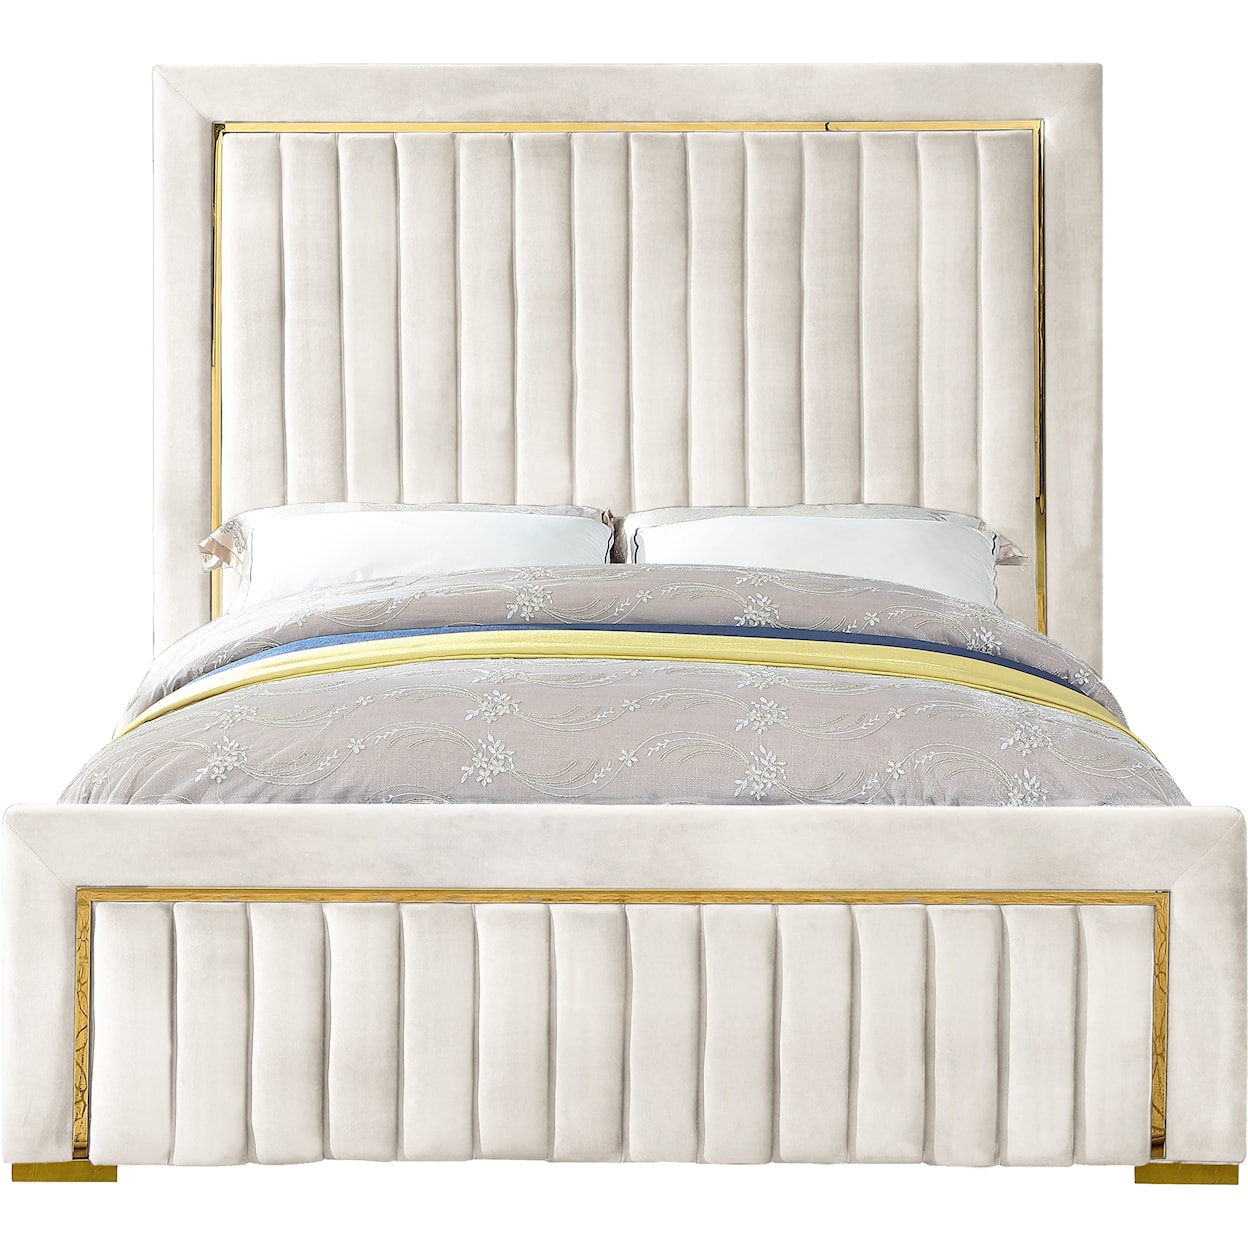 Meridian Furniture Dolce Queen Bed